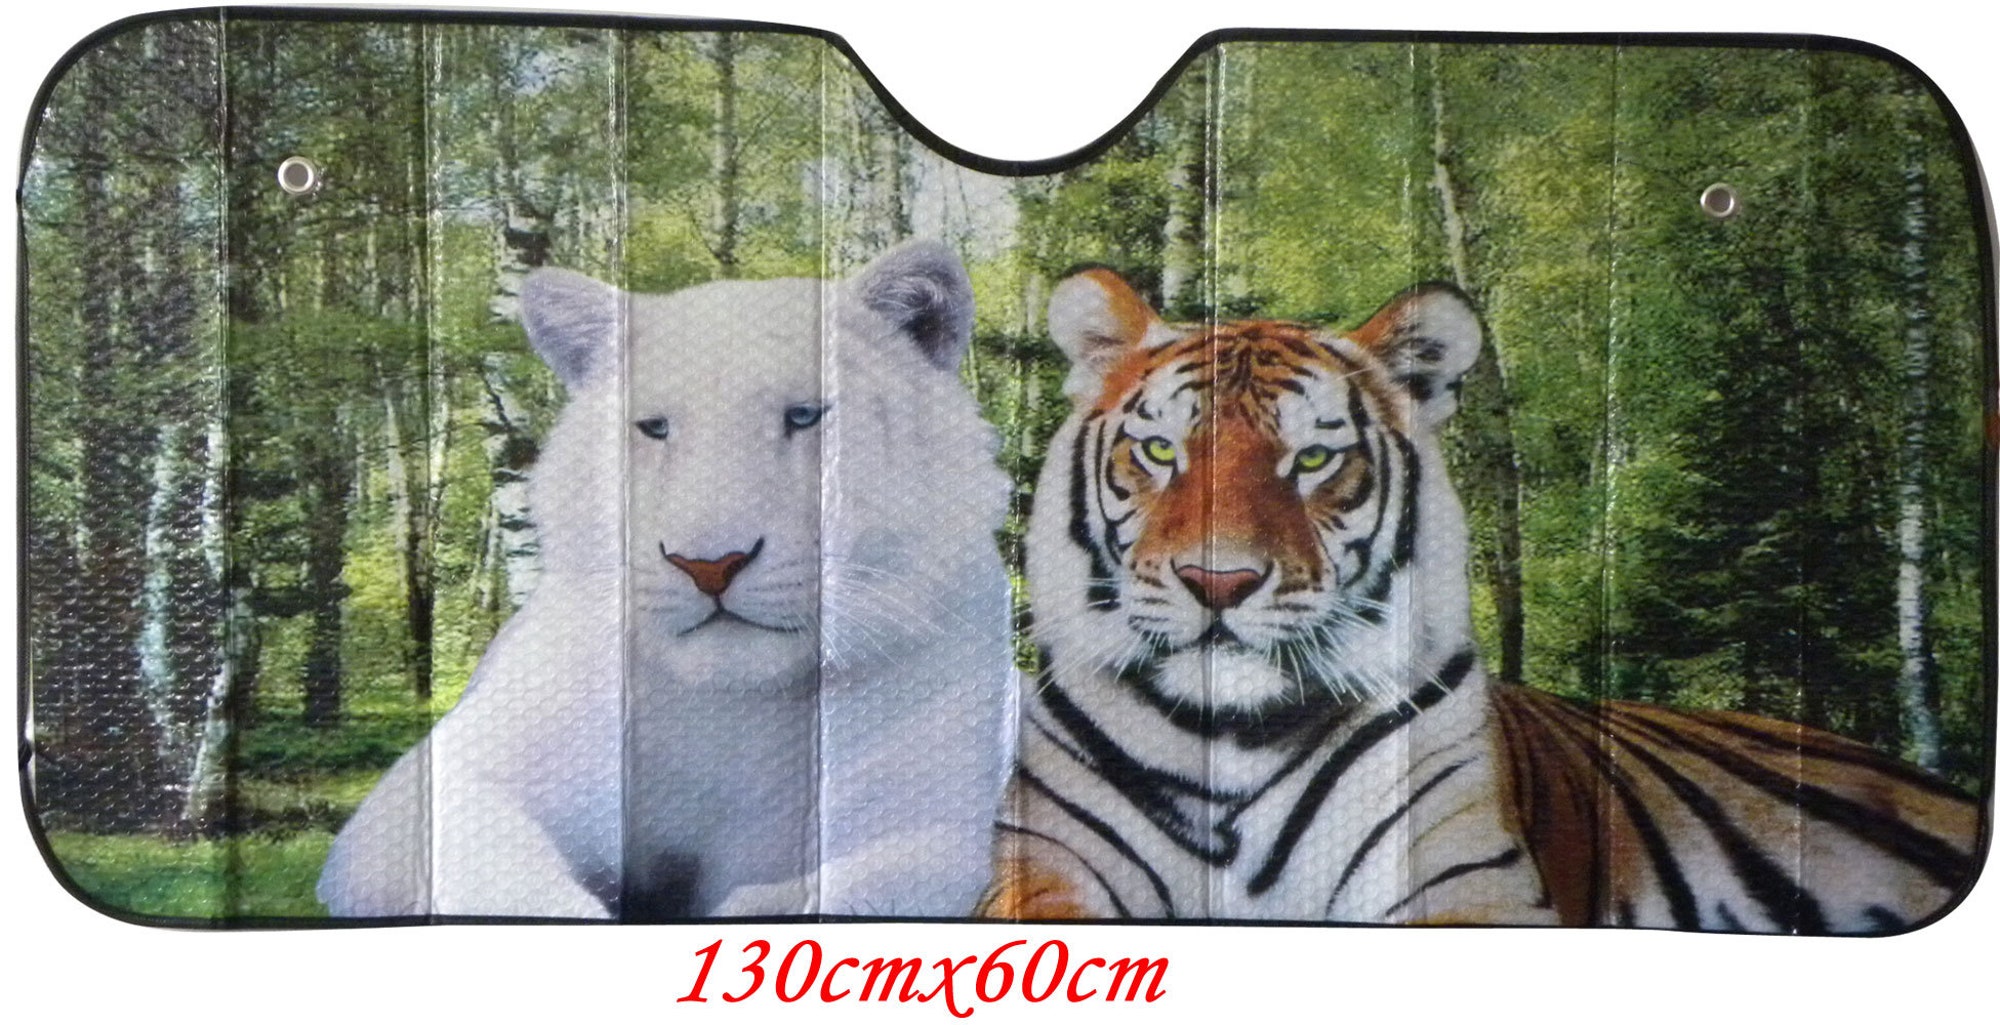 Car window sunshade  with a cool white tiger